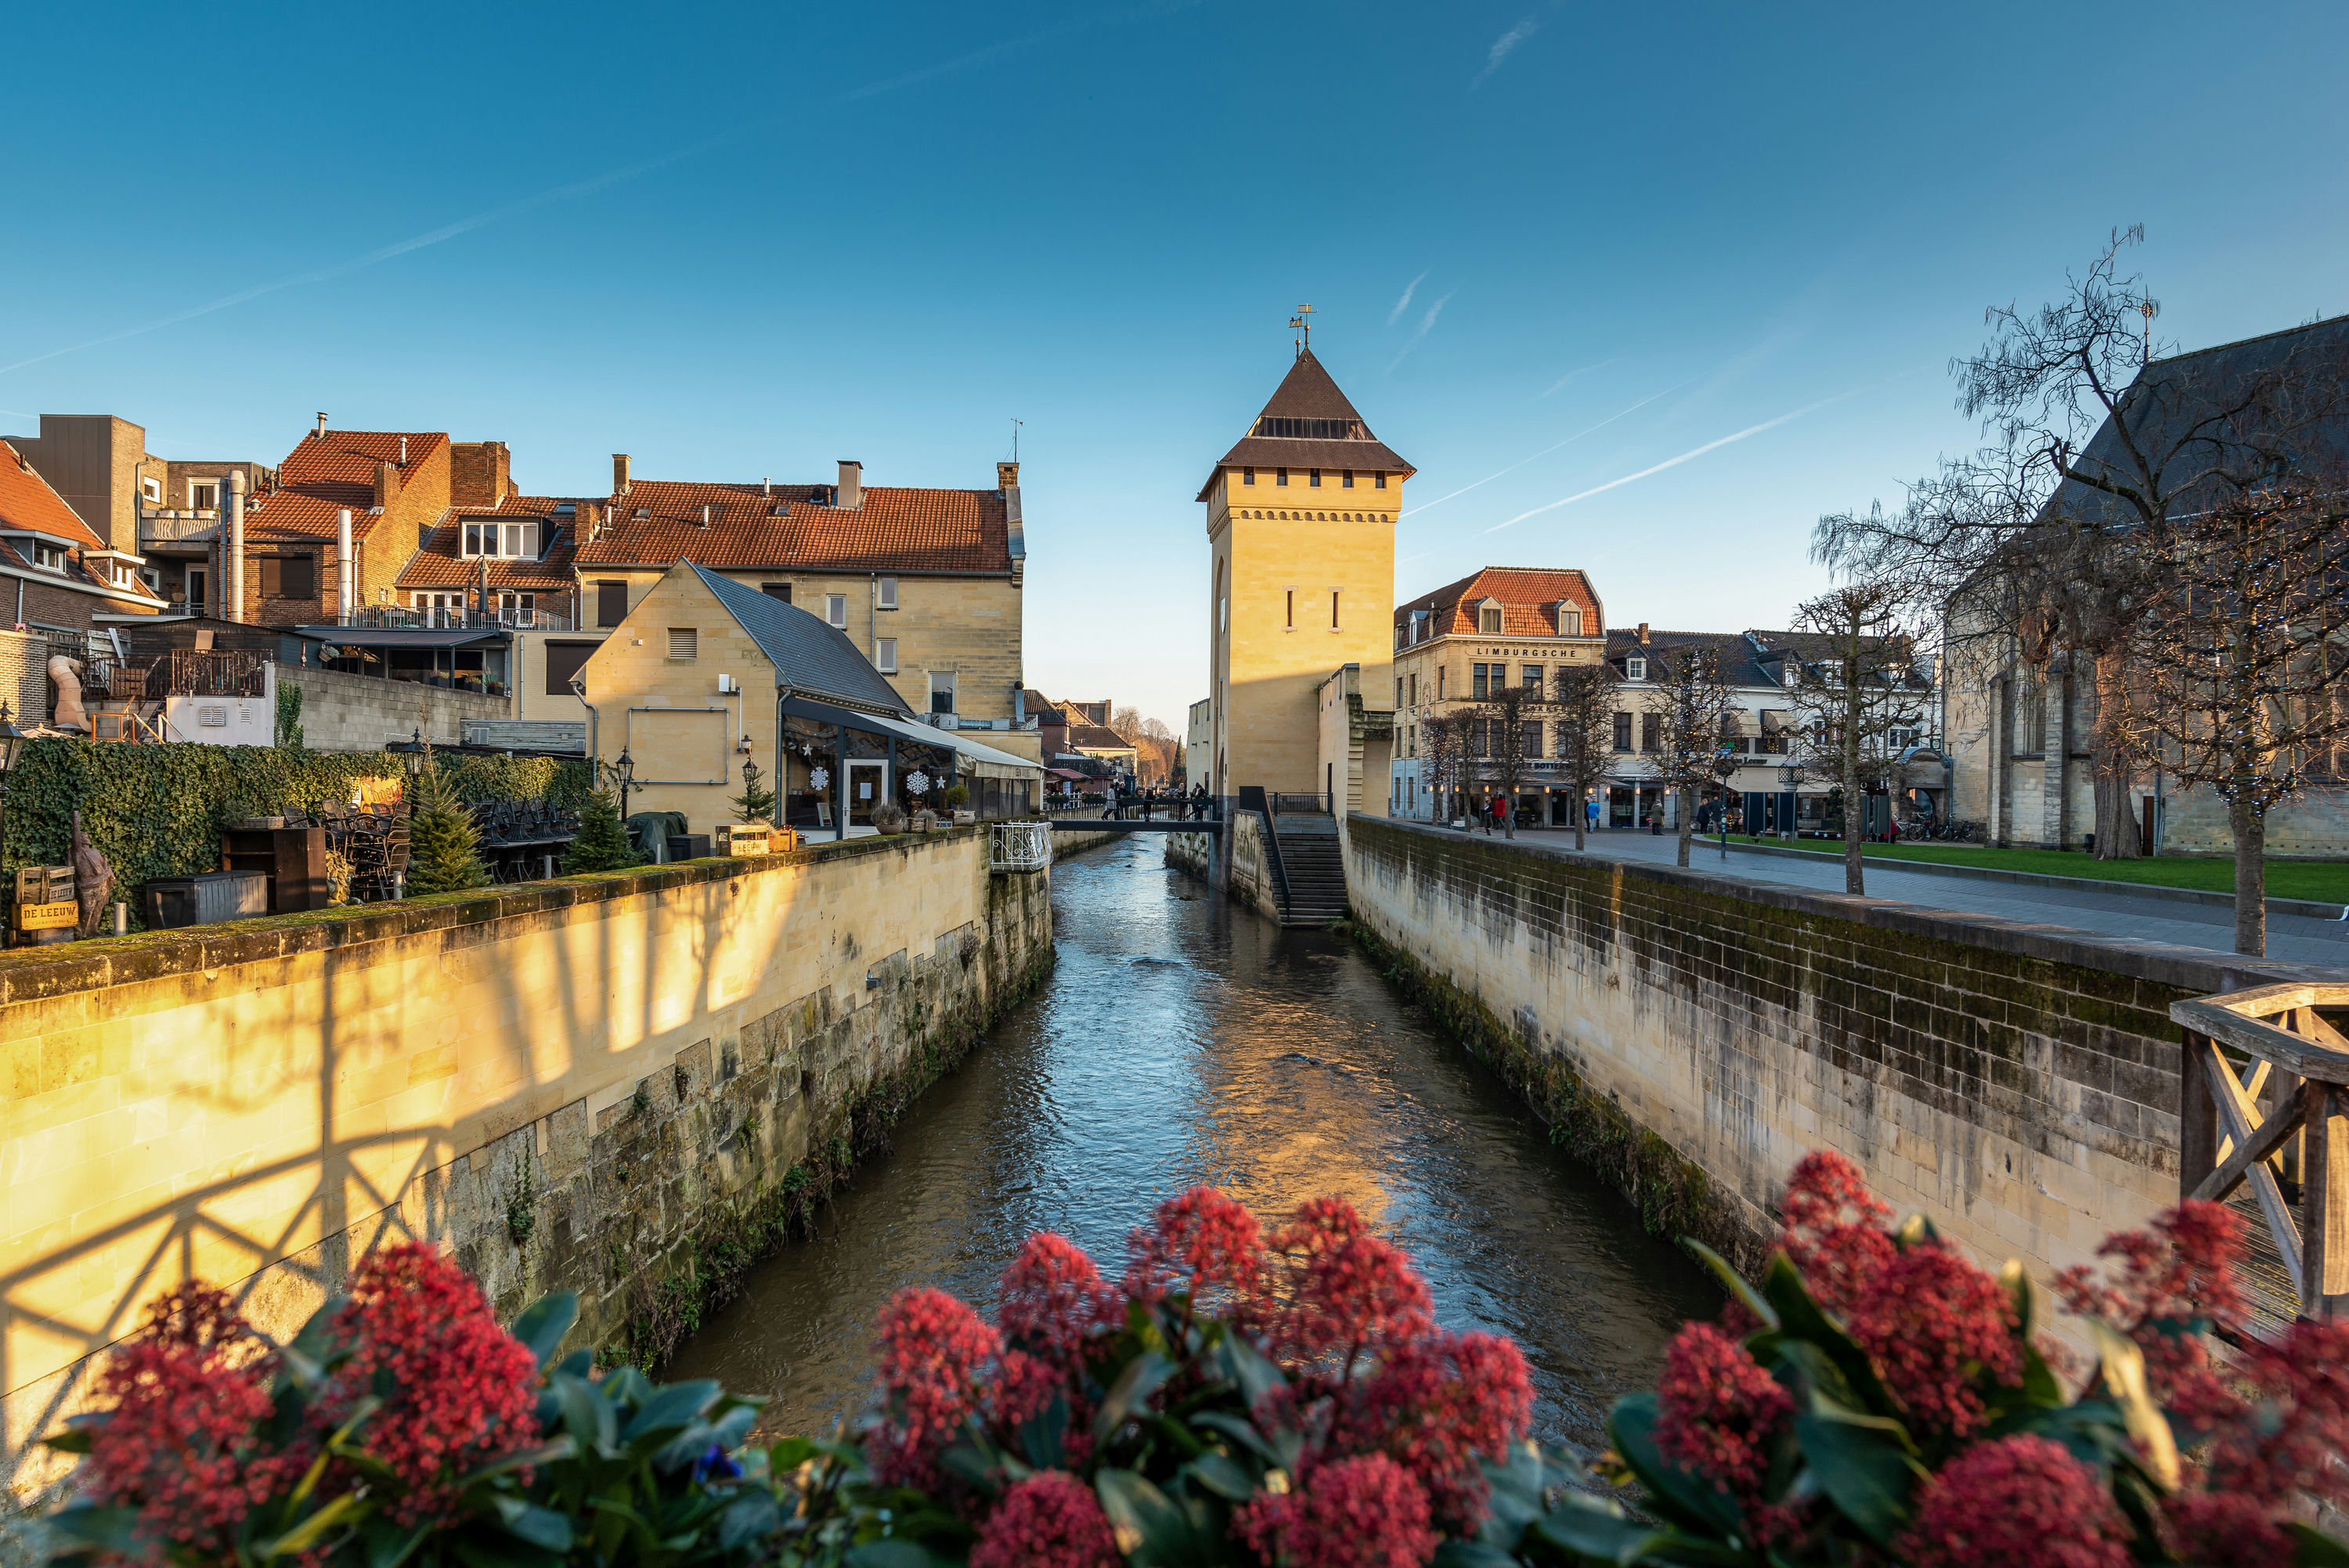 Visit Valkenburg where history unfolds from the Roman Empire to the present day